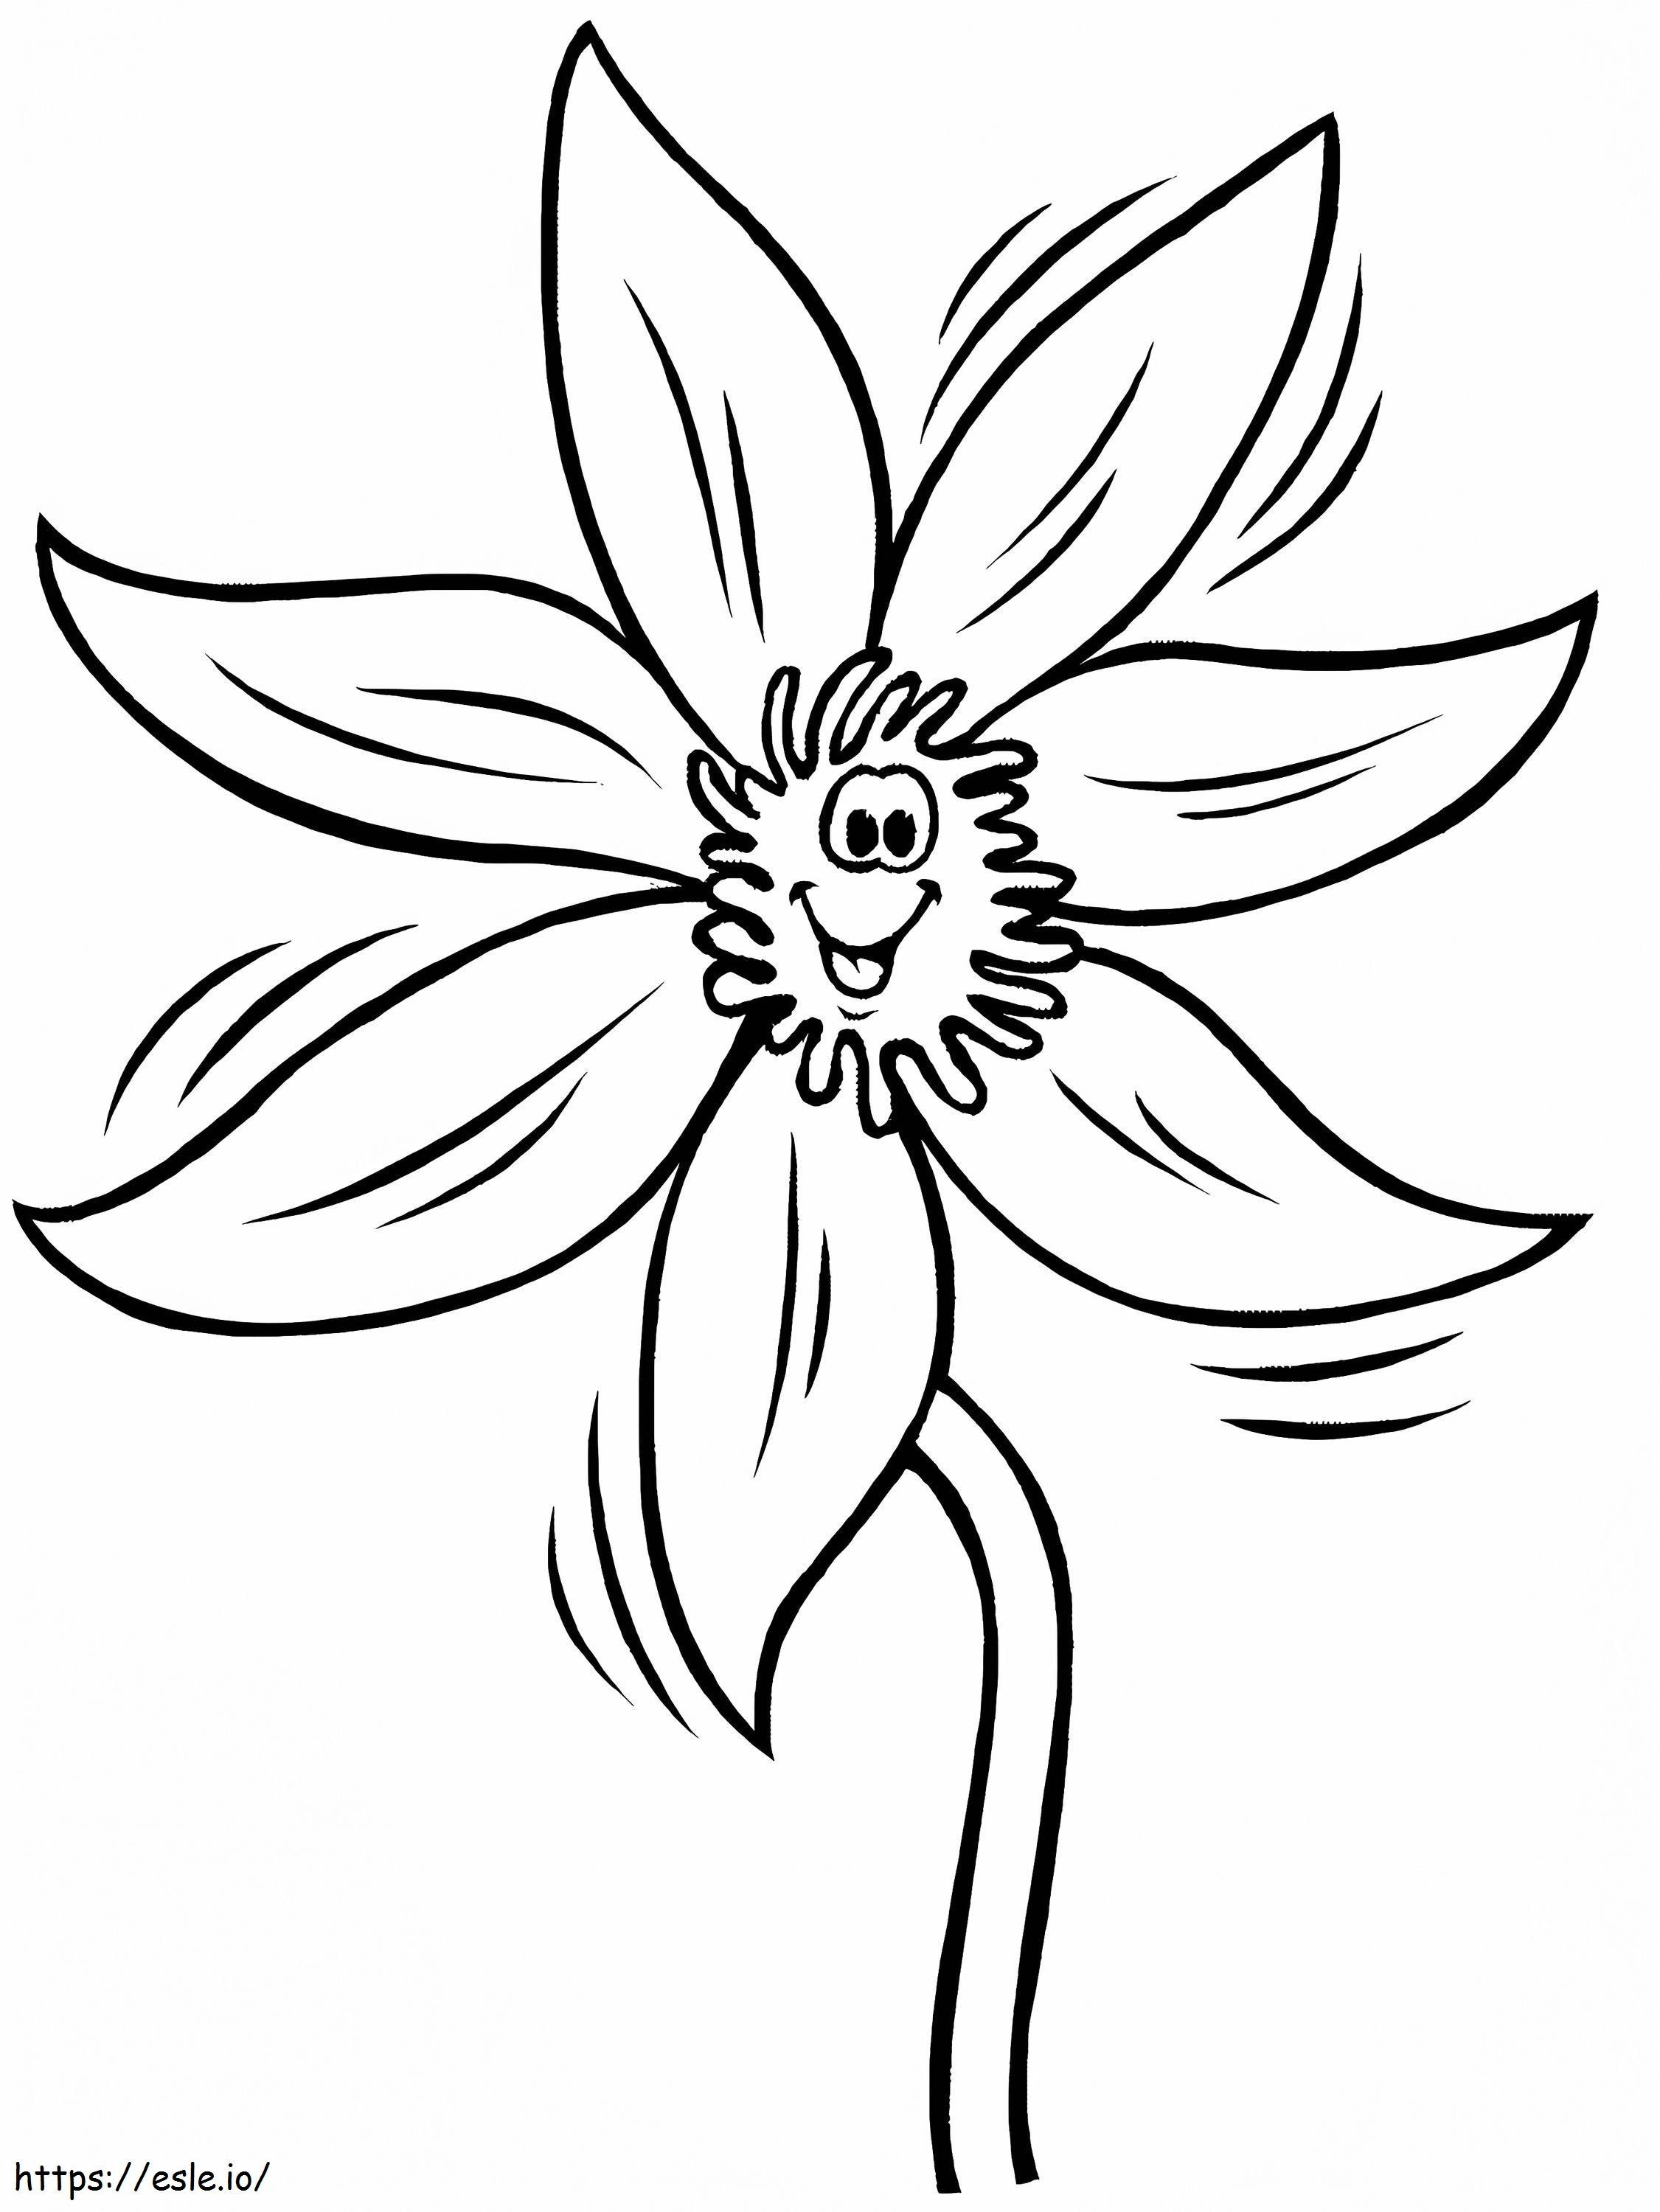 1528166975 Clematisa4 coloring page